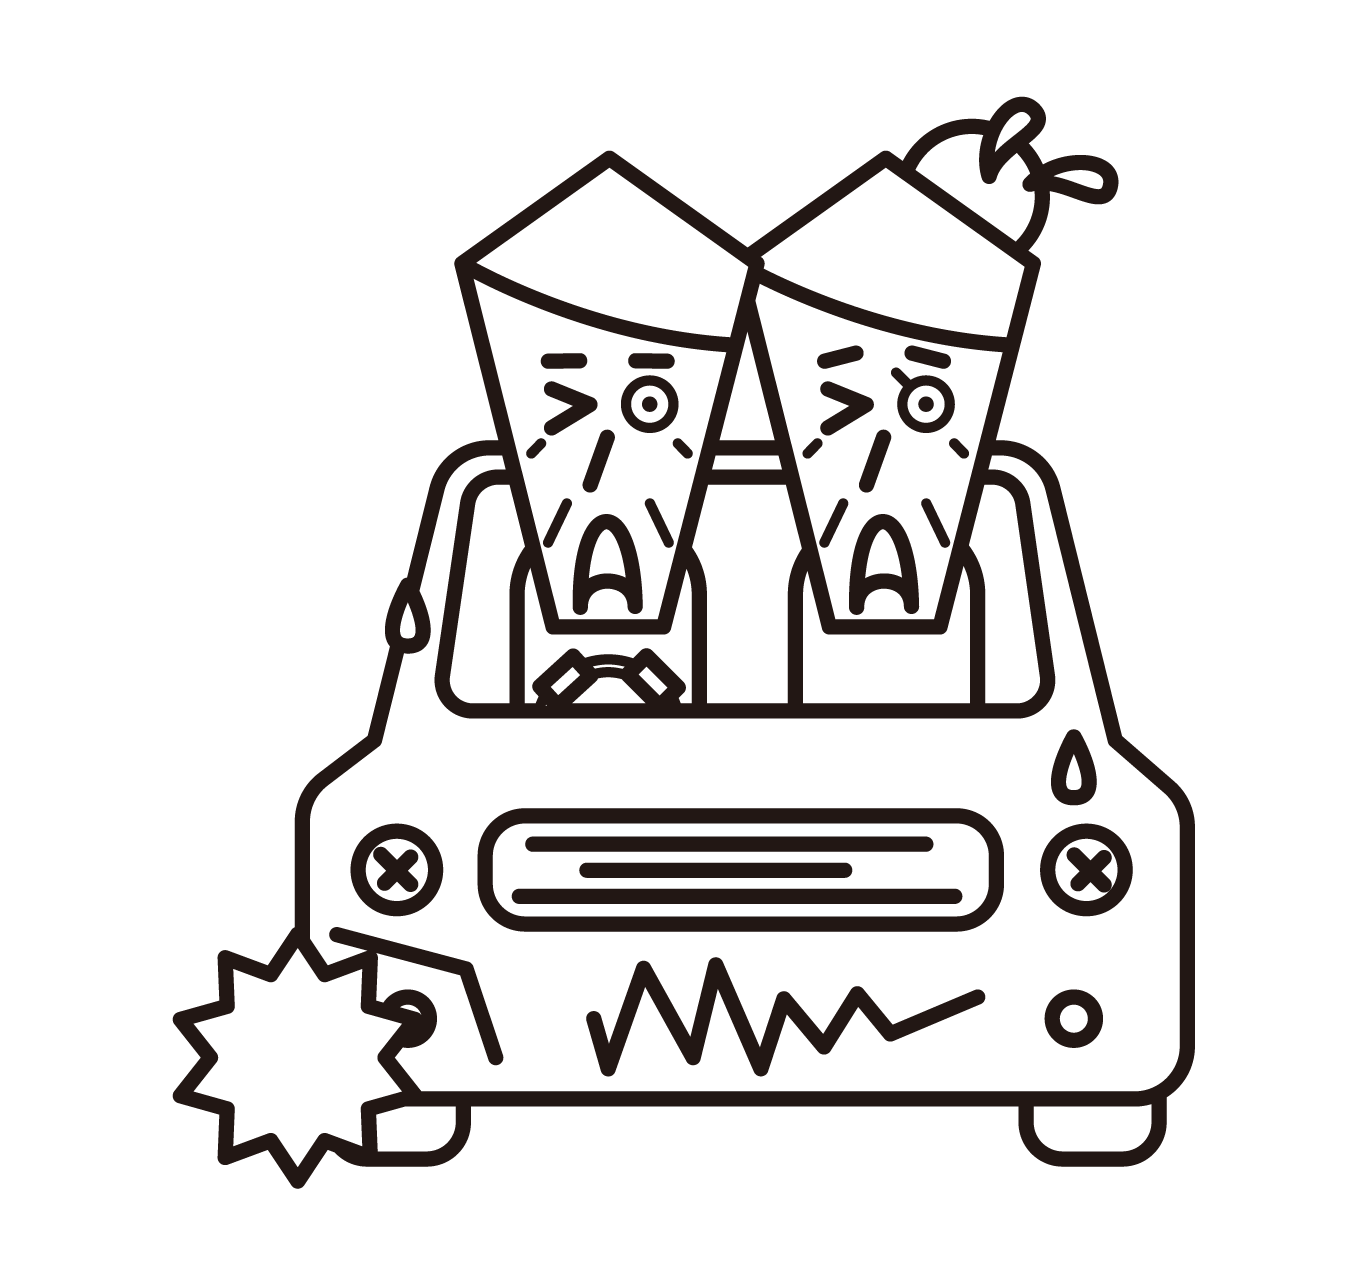 Illustration of an elderly couple who caused a traffic accident